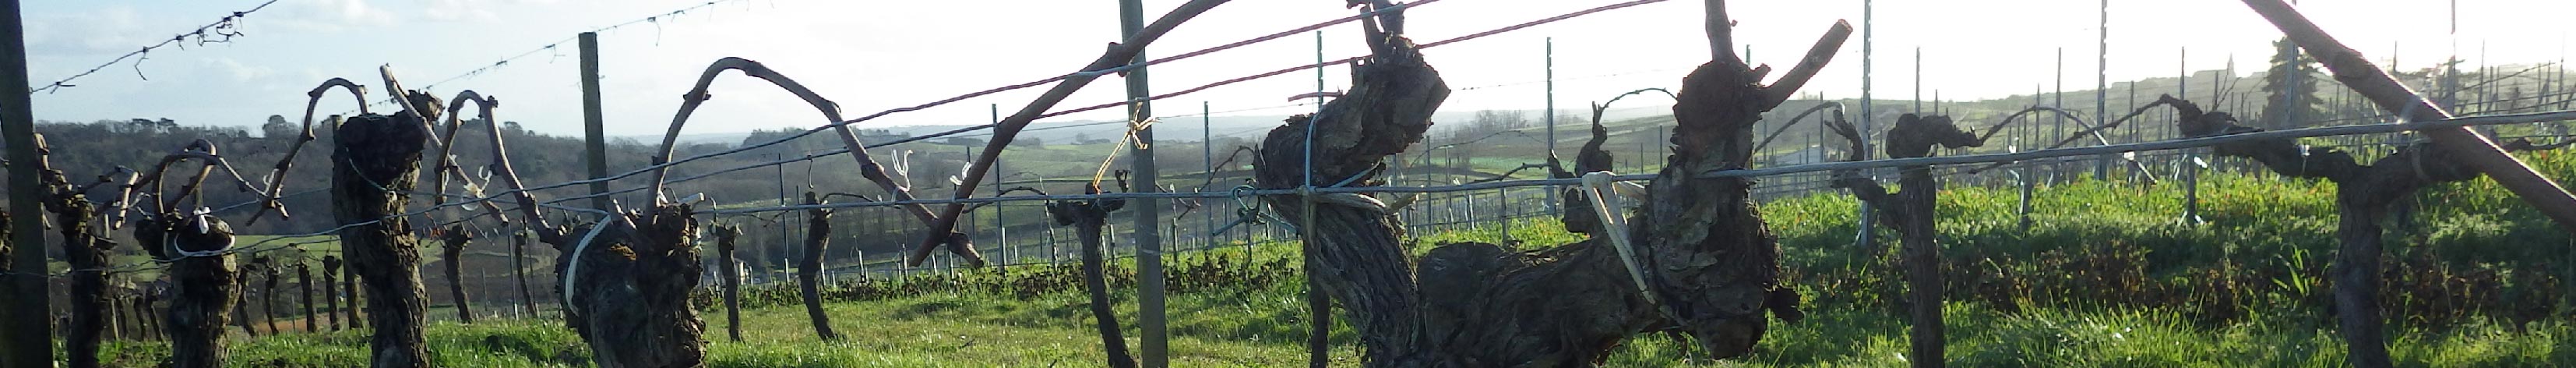 Vines - the viticultural fountain of youth